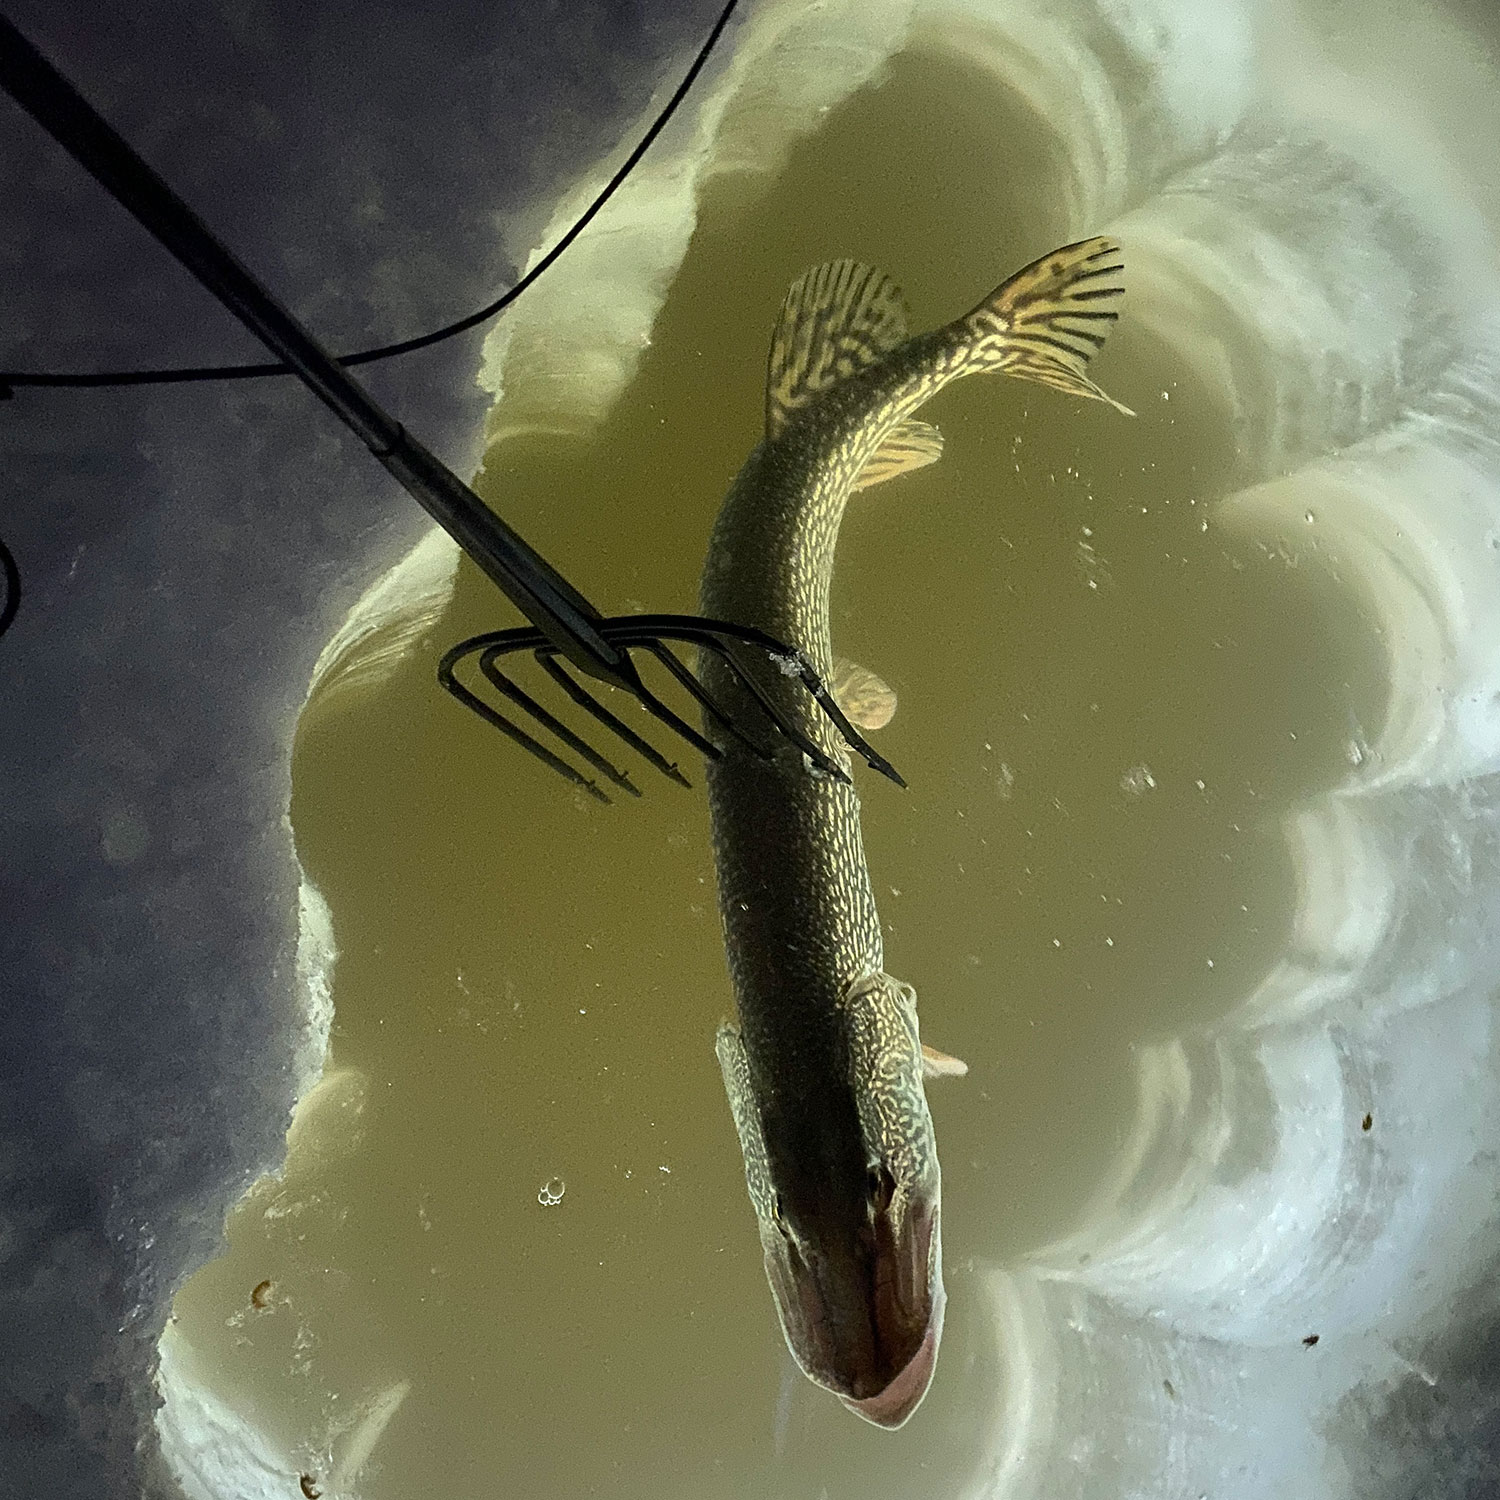 Northern pike in a spearing hole with a spear right above it